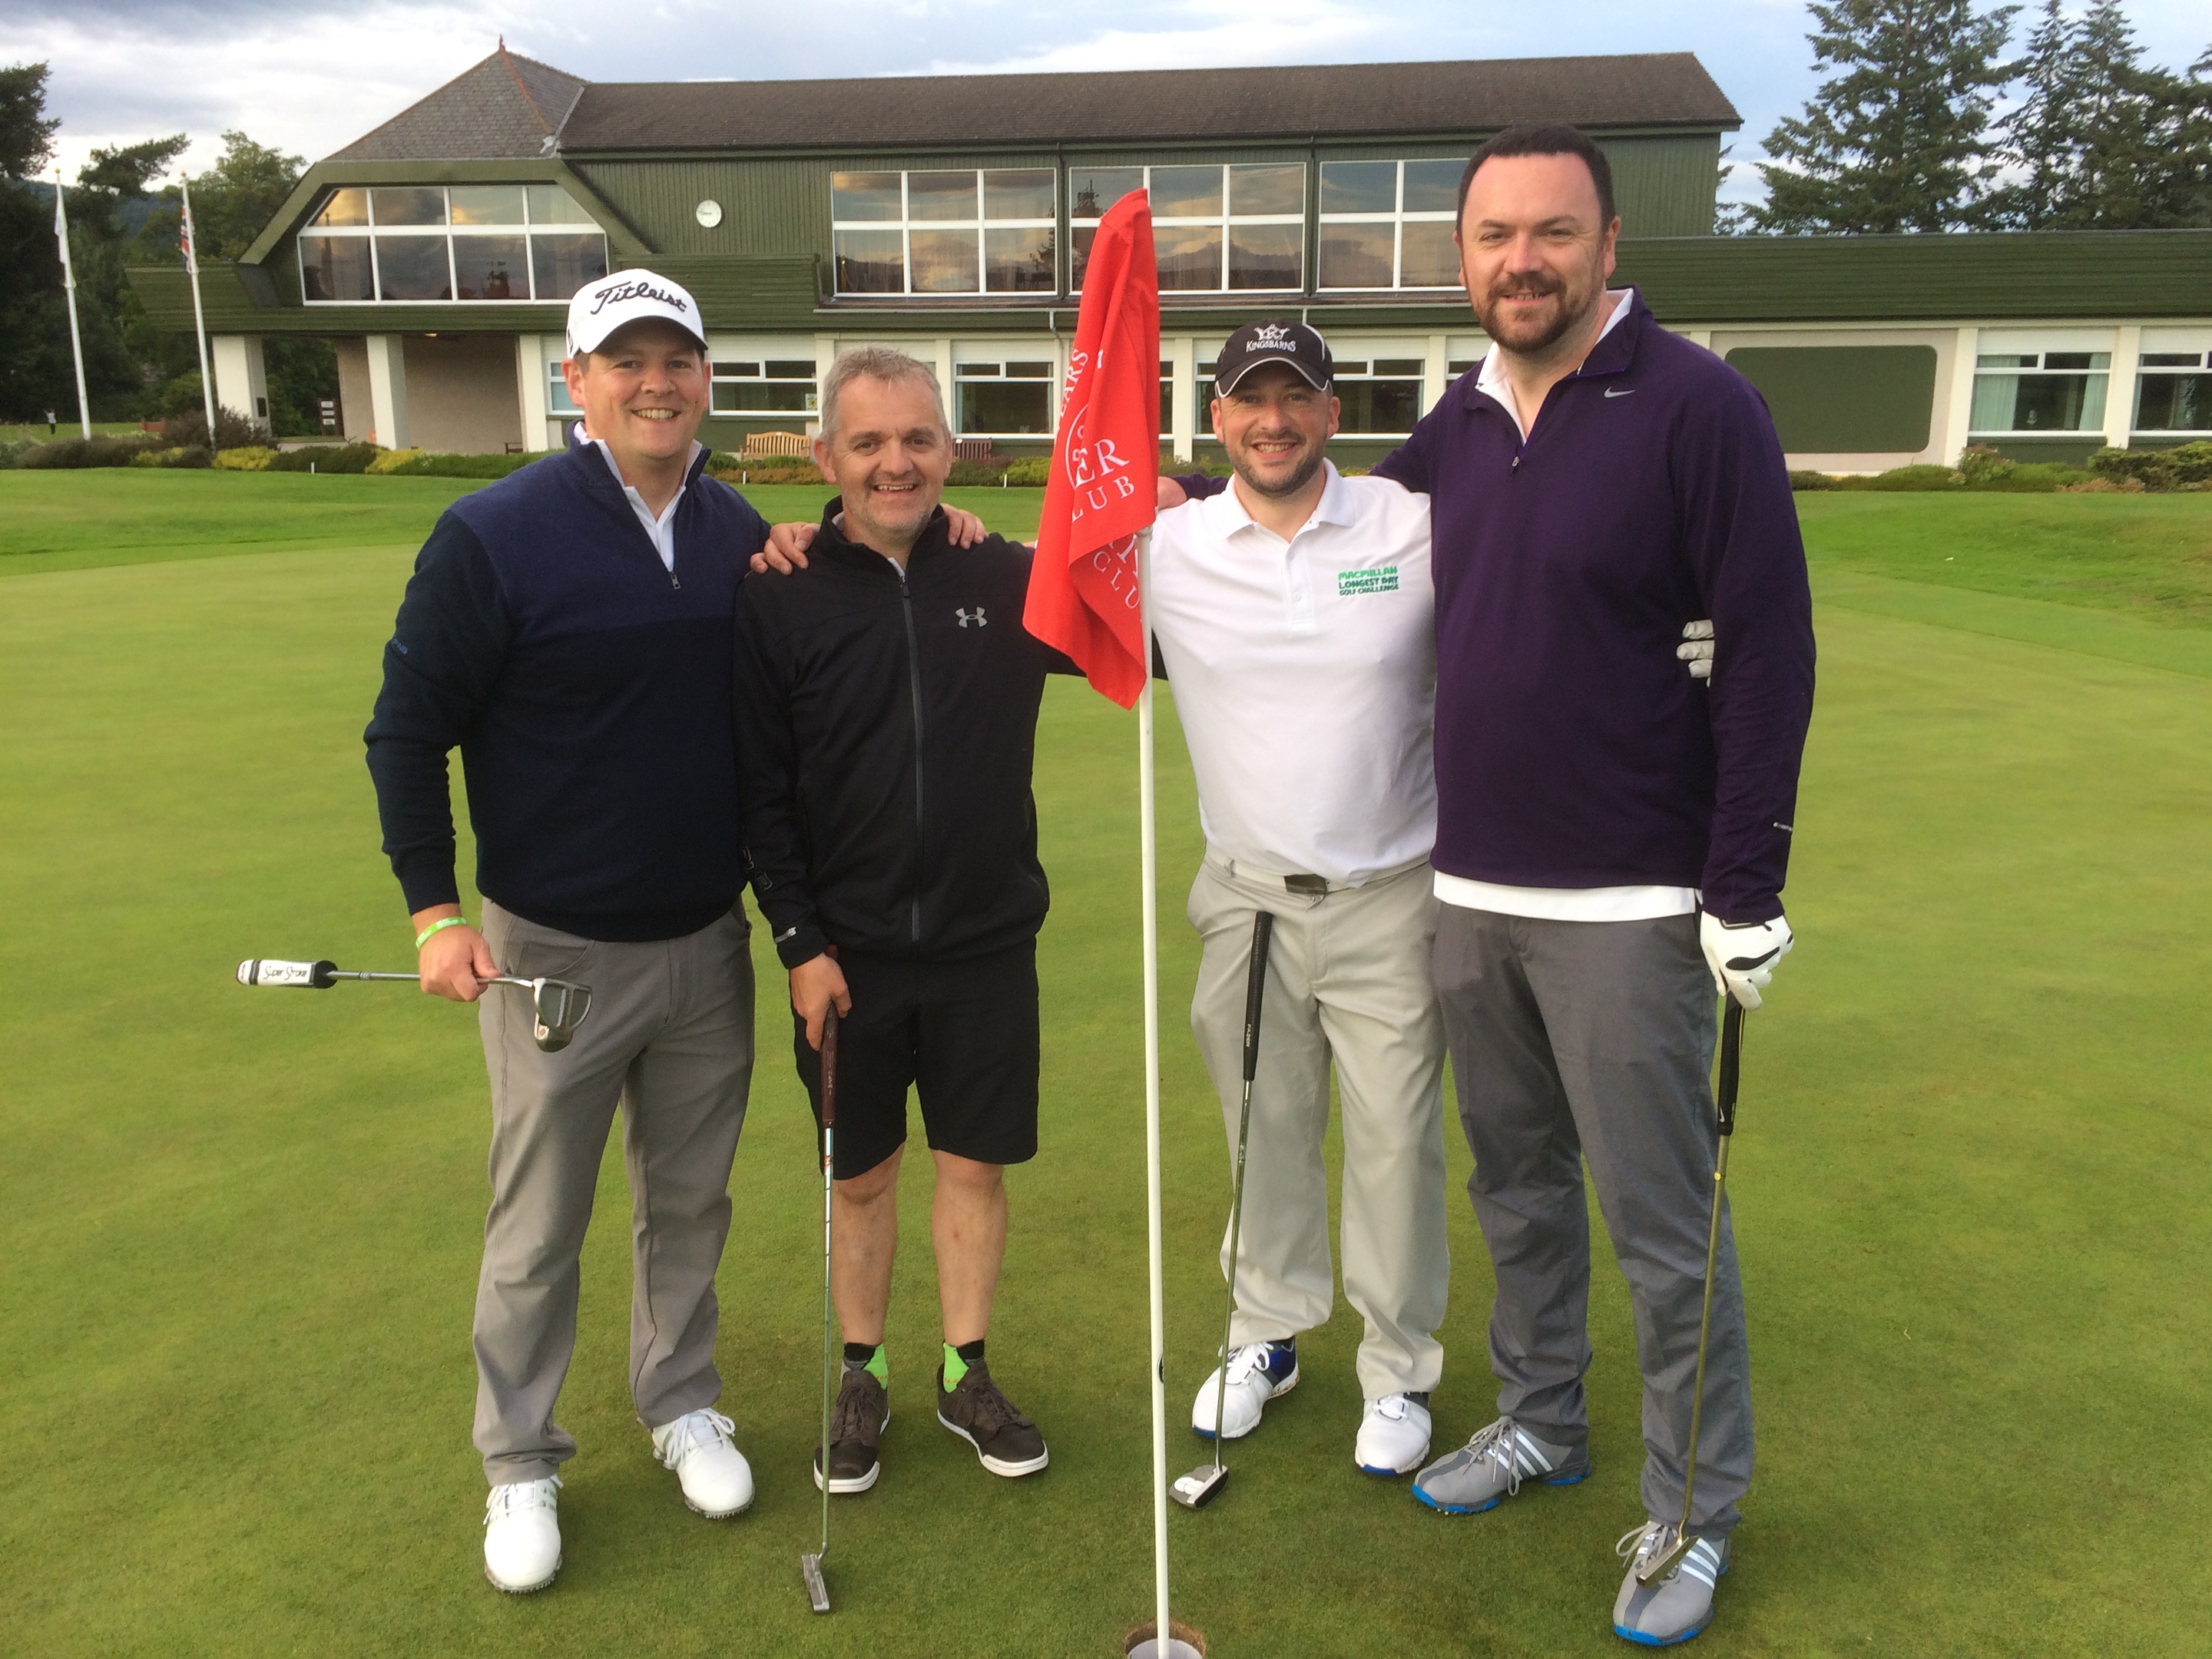 Golfers (L-R) Mike Robbie, Keith Young, Graeme McDonald and Neil Archibald.